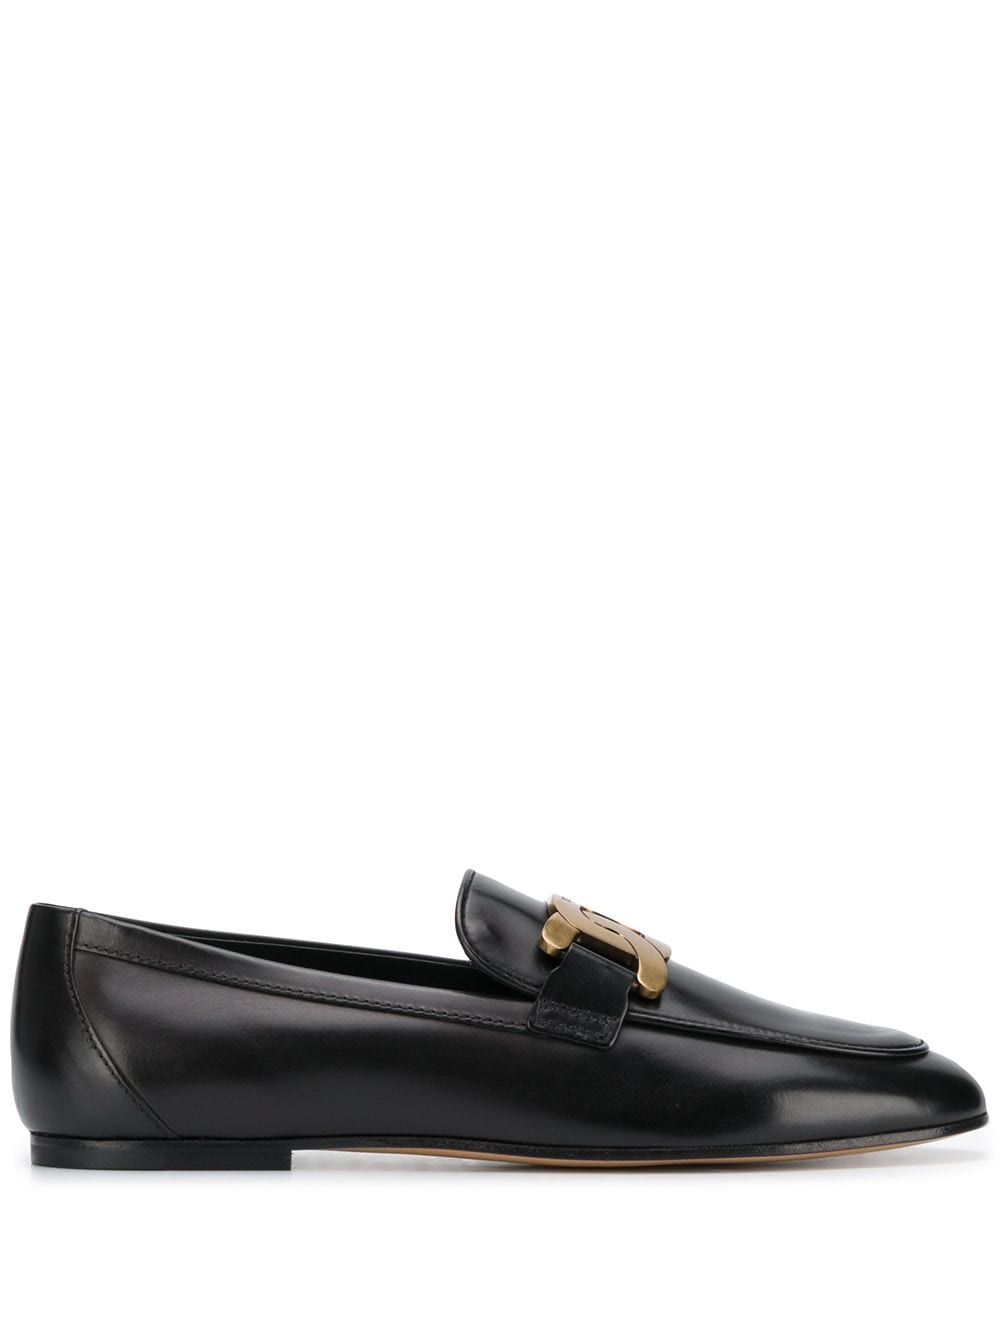 TOD'S Black Leather Chain-Strap Loafers for Women - SS24 Collection